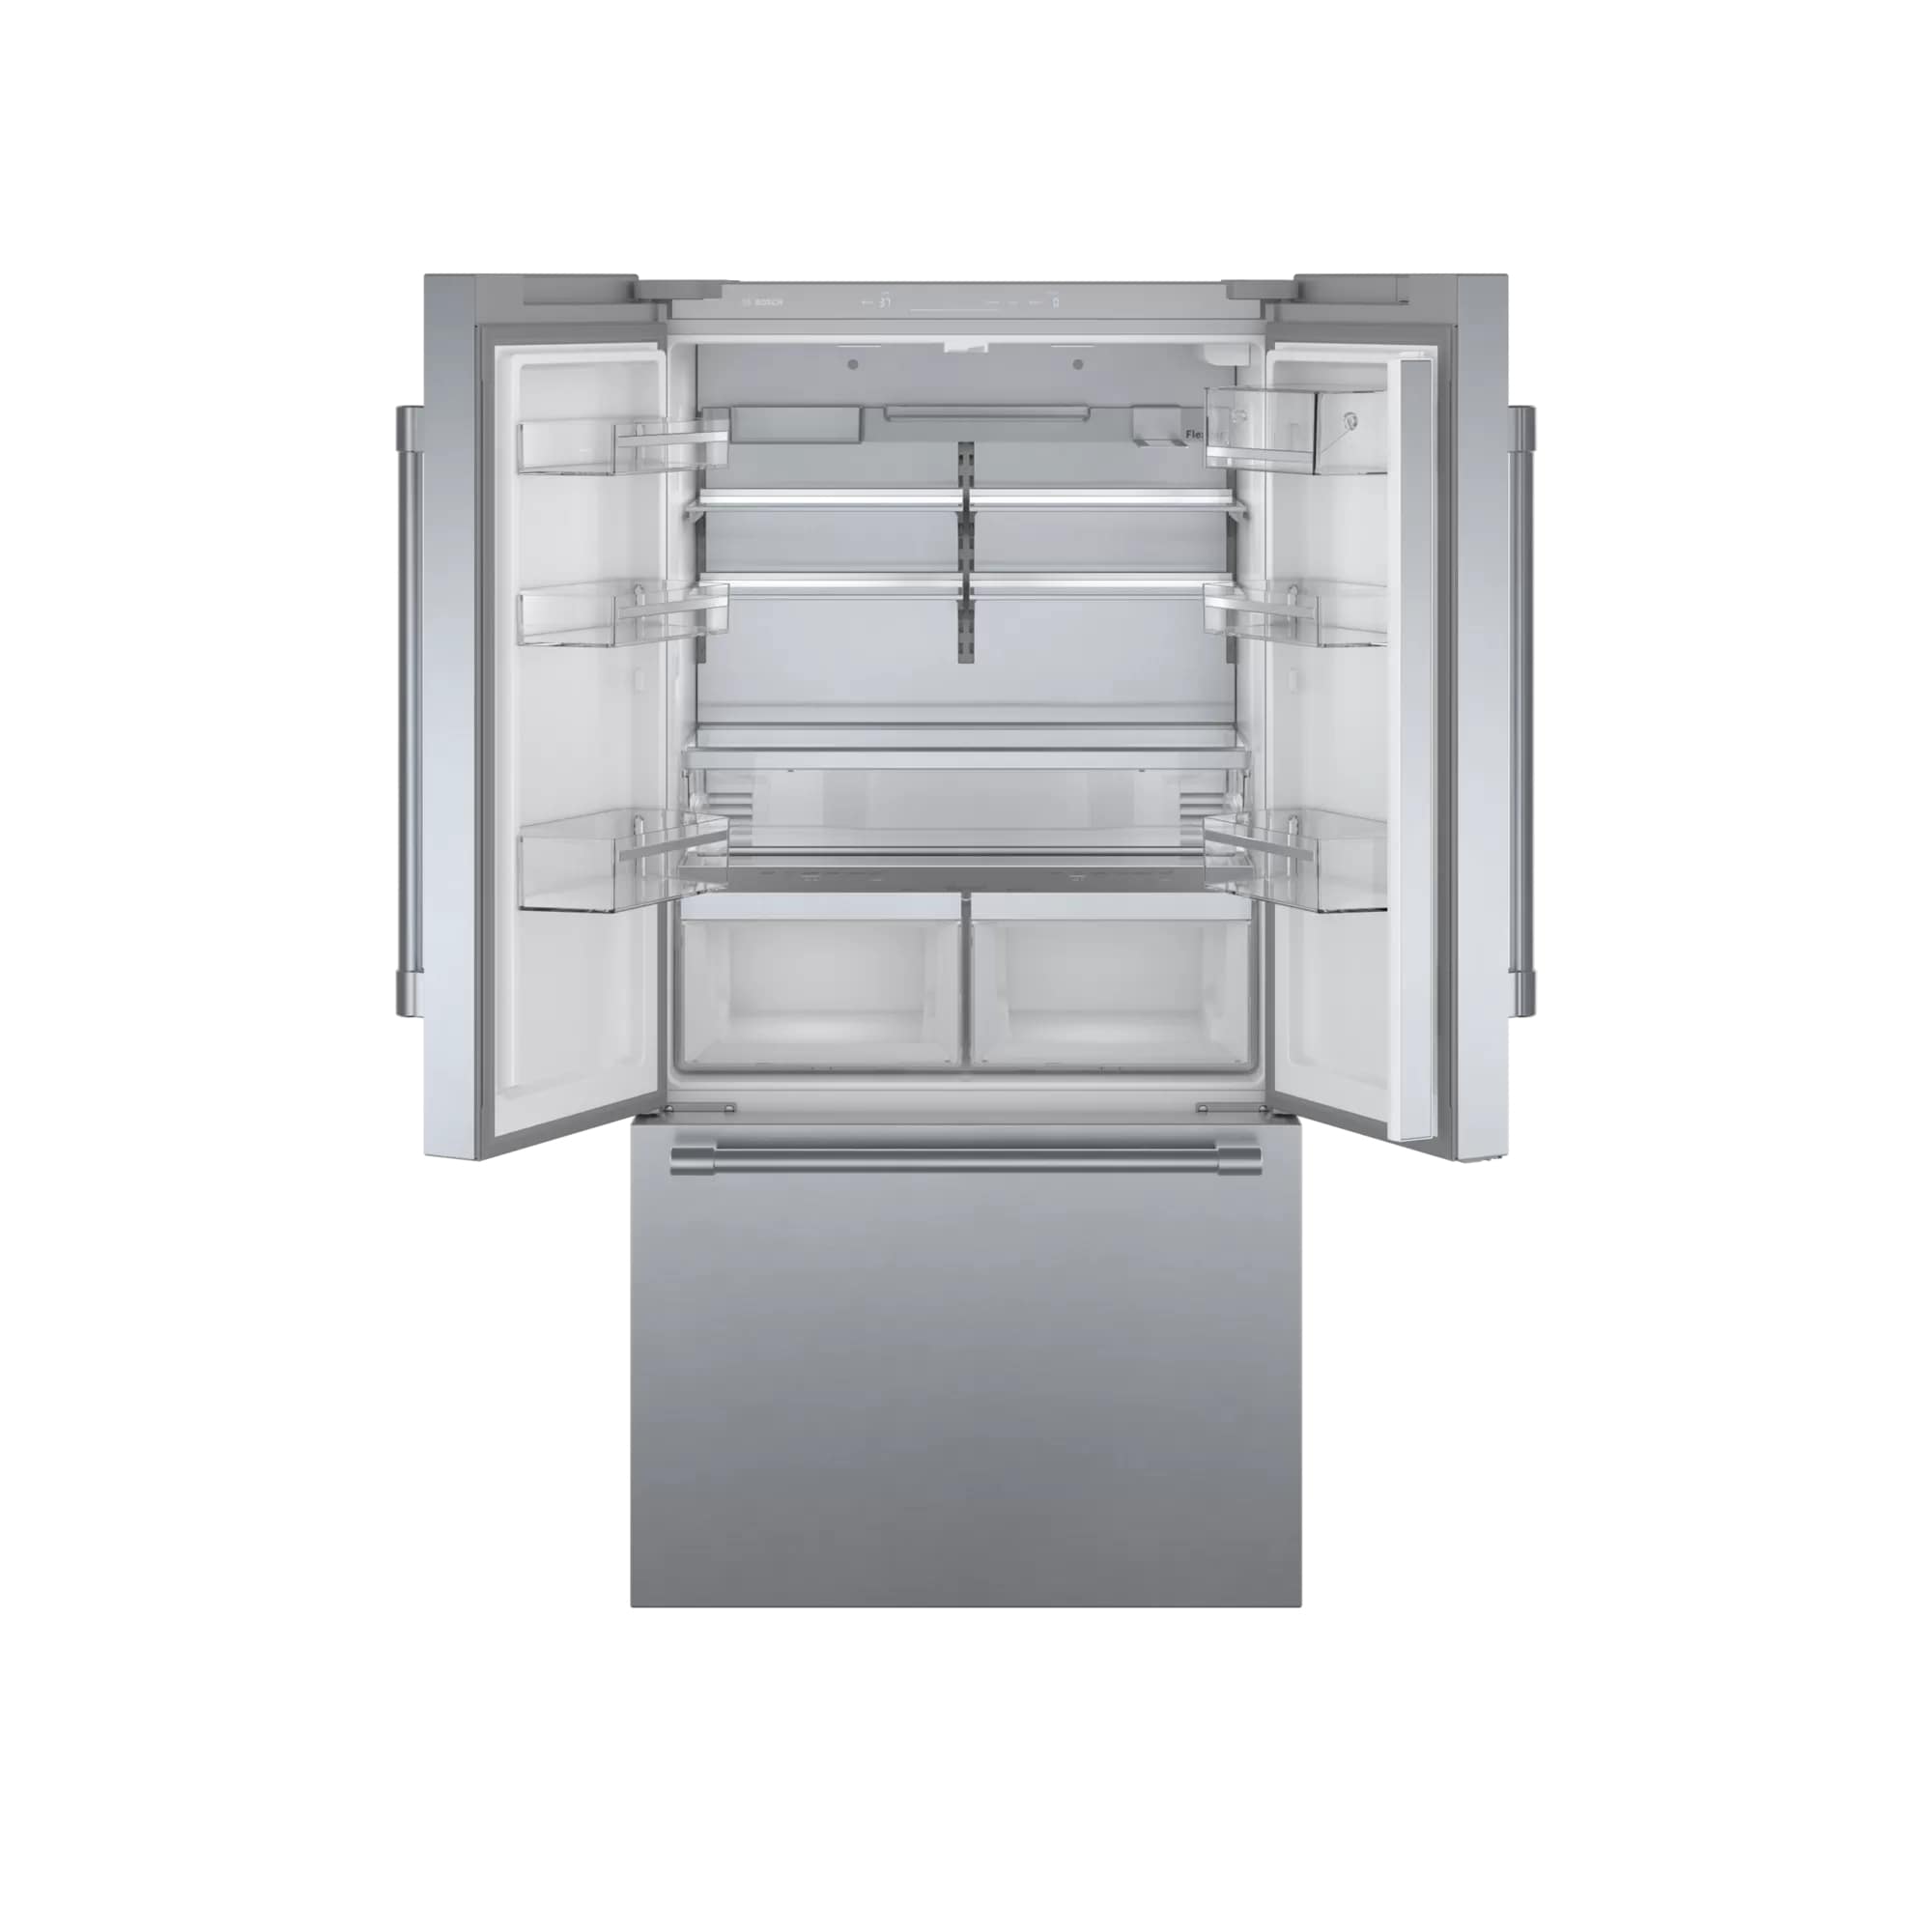 Bosch - 35.625 Inch 20.8 cu. ft French Door Refrigerator in Stainless - B36CT81ENS